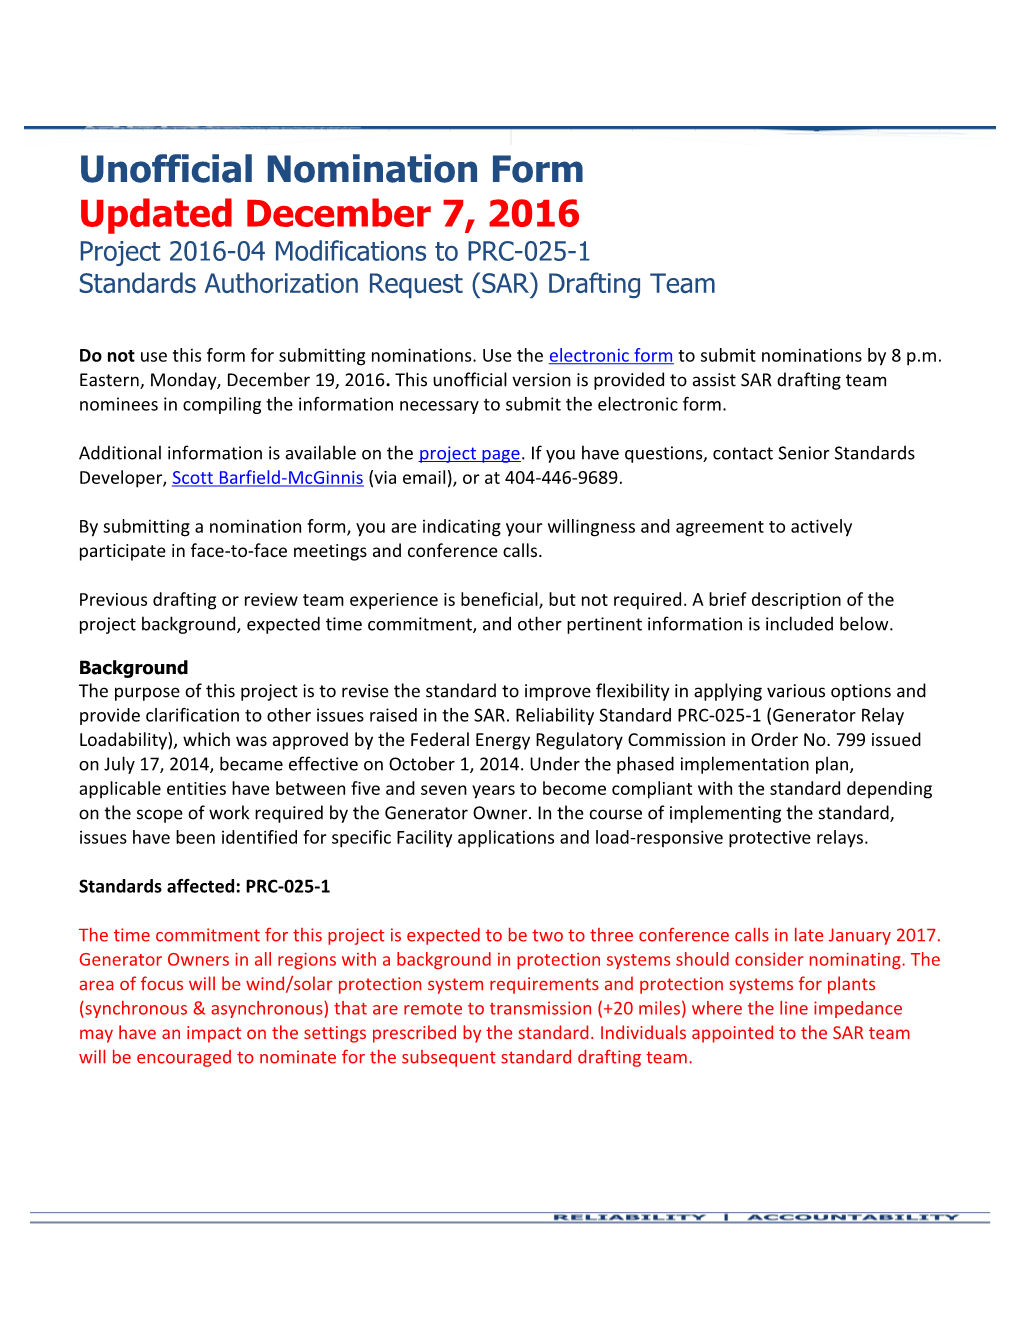 Project 2016-04 SAR SDT Unofficial Nomination Form